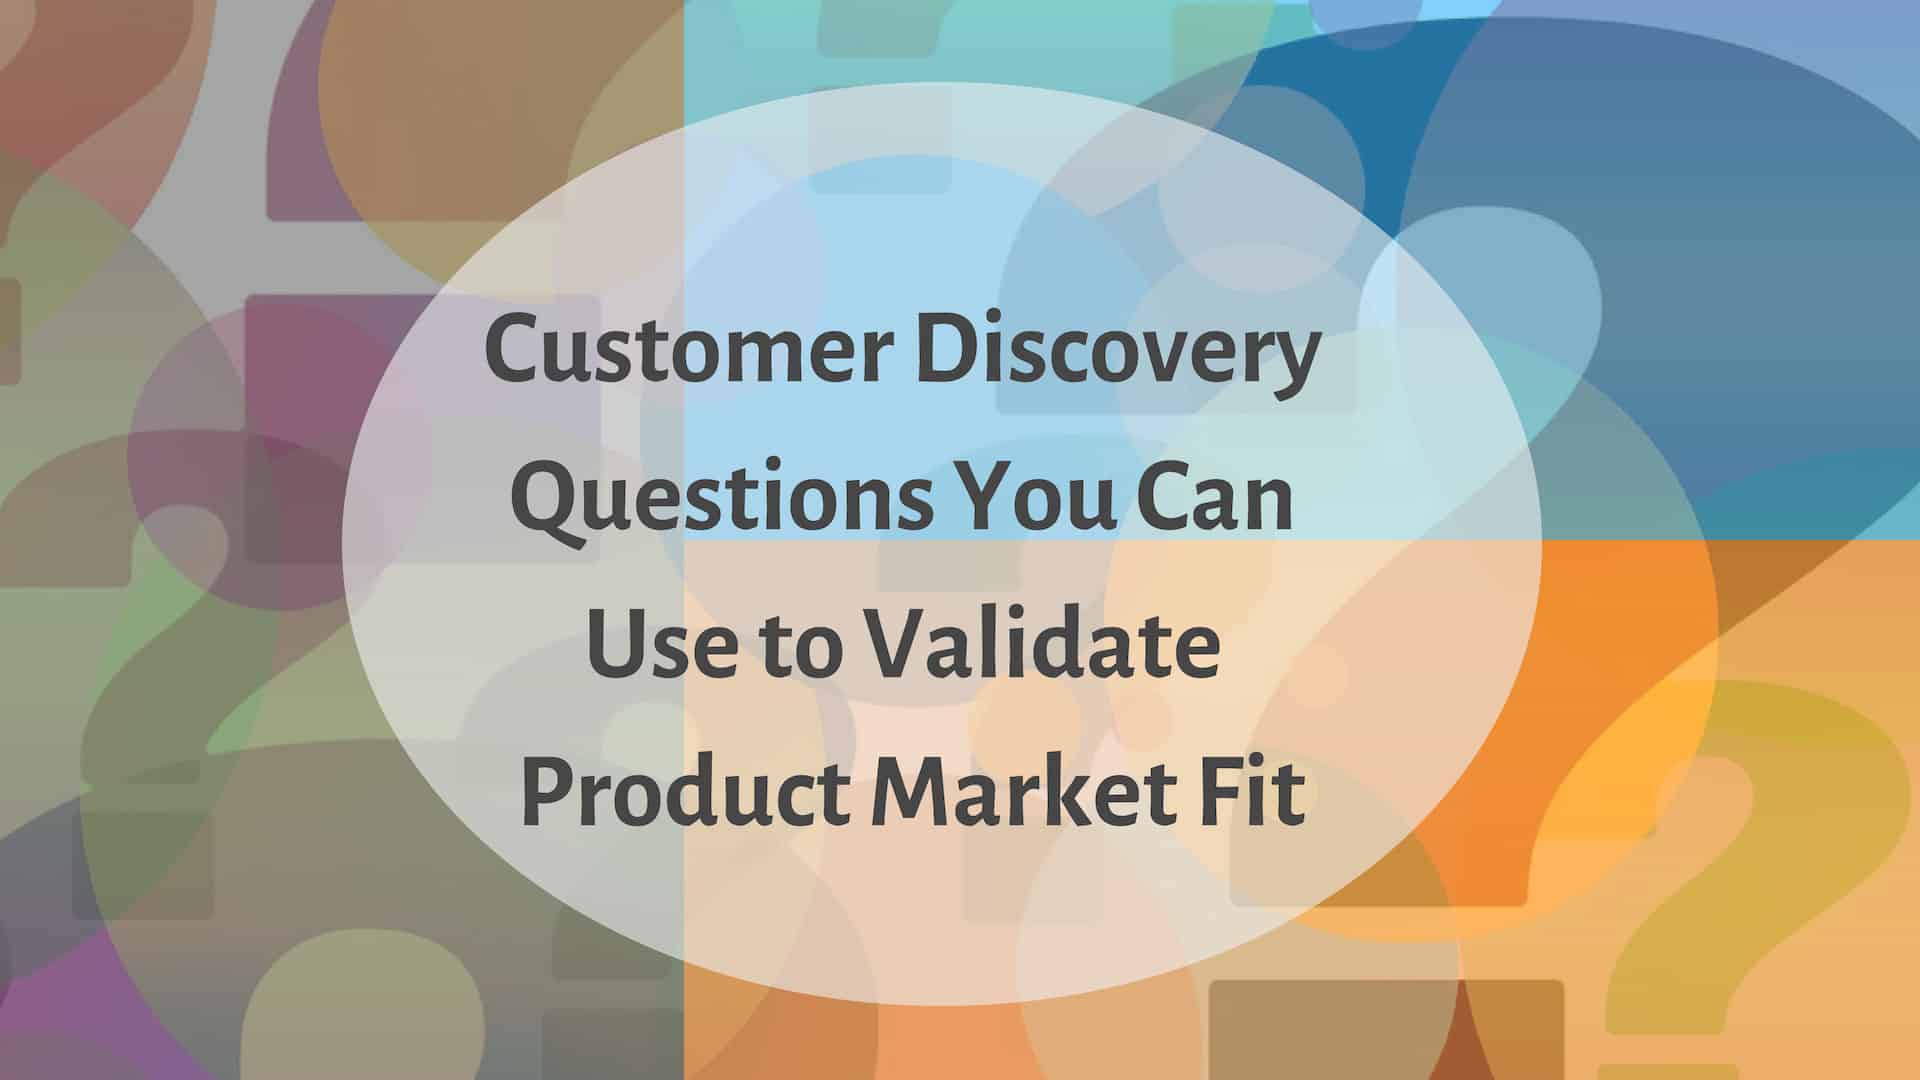 Customer Discovery Questions You Can Use To Validate Product Market Fit For Your Startup